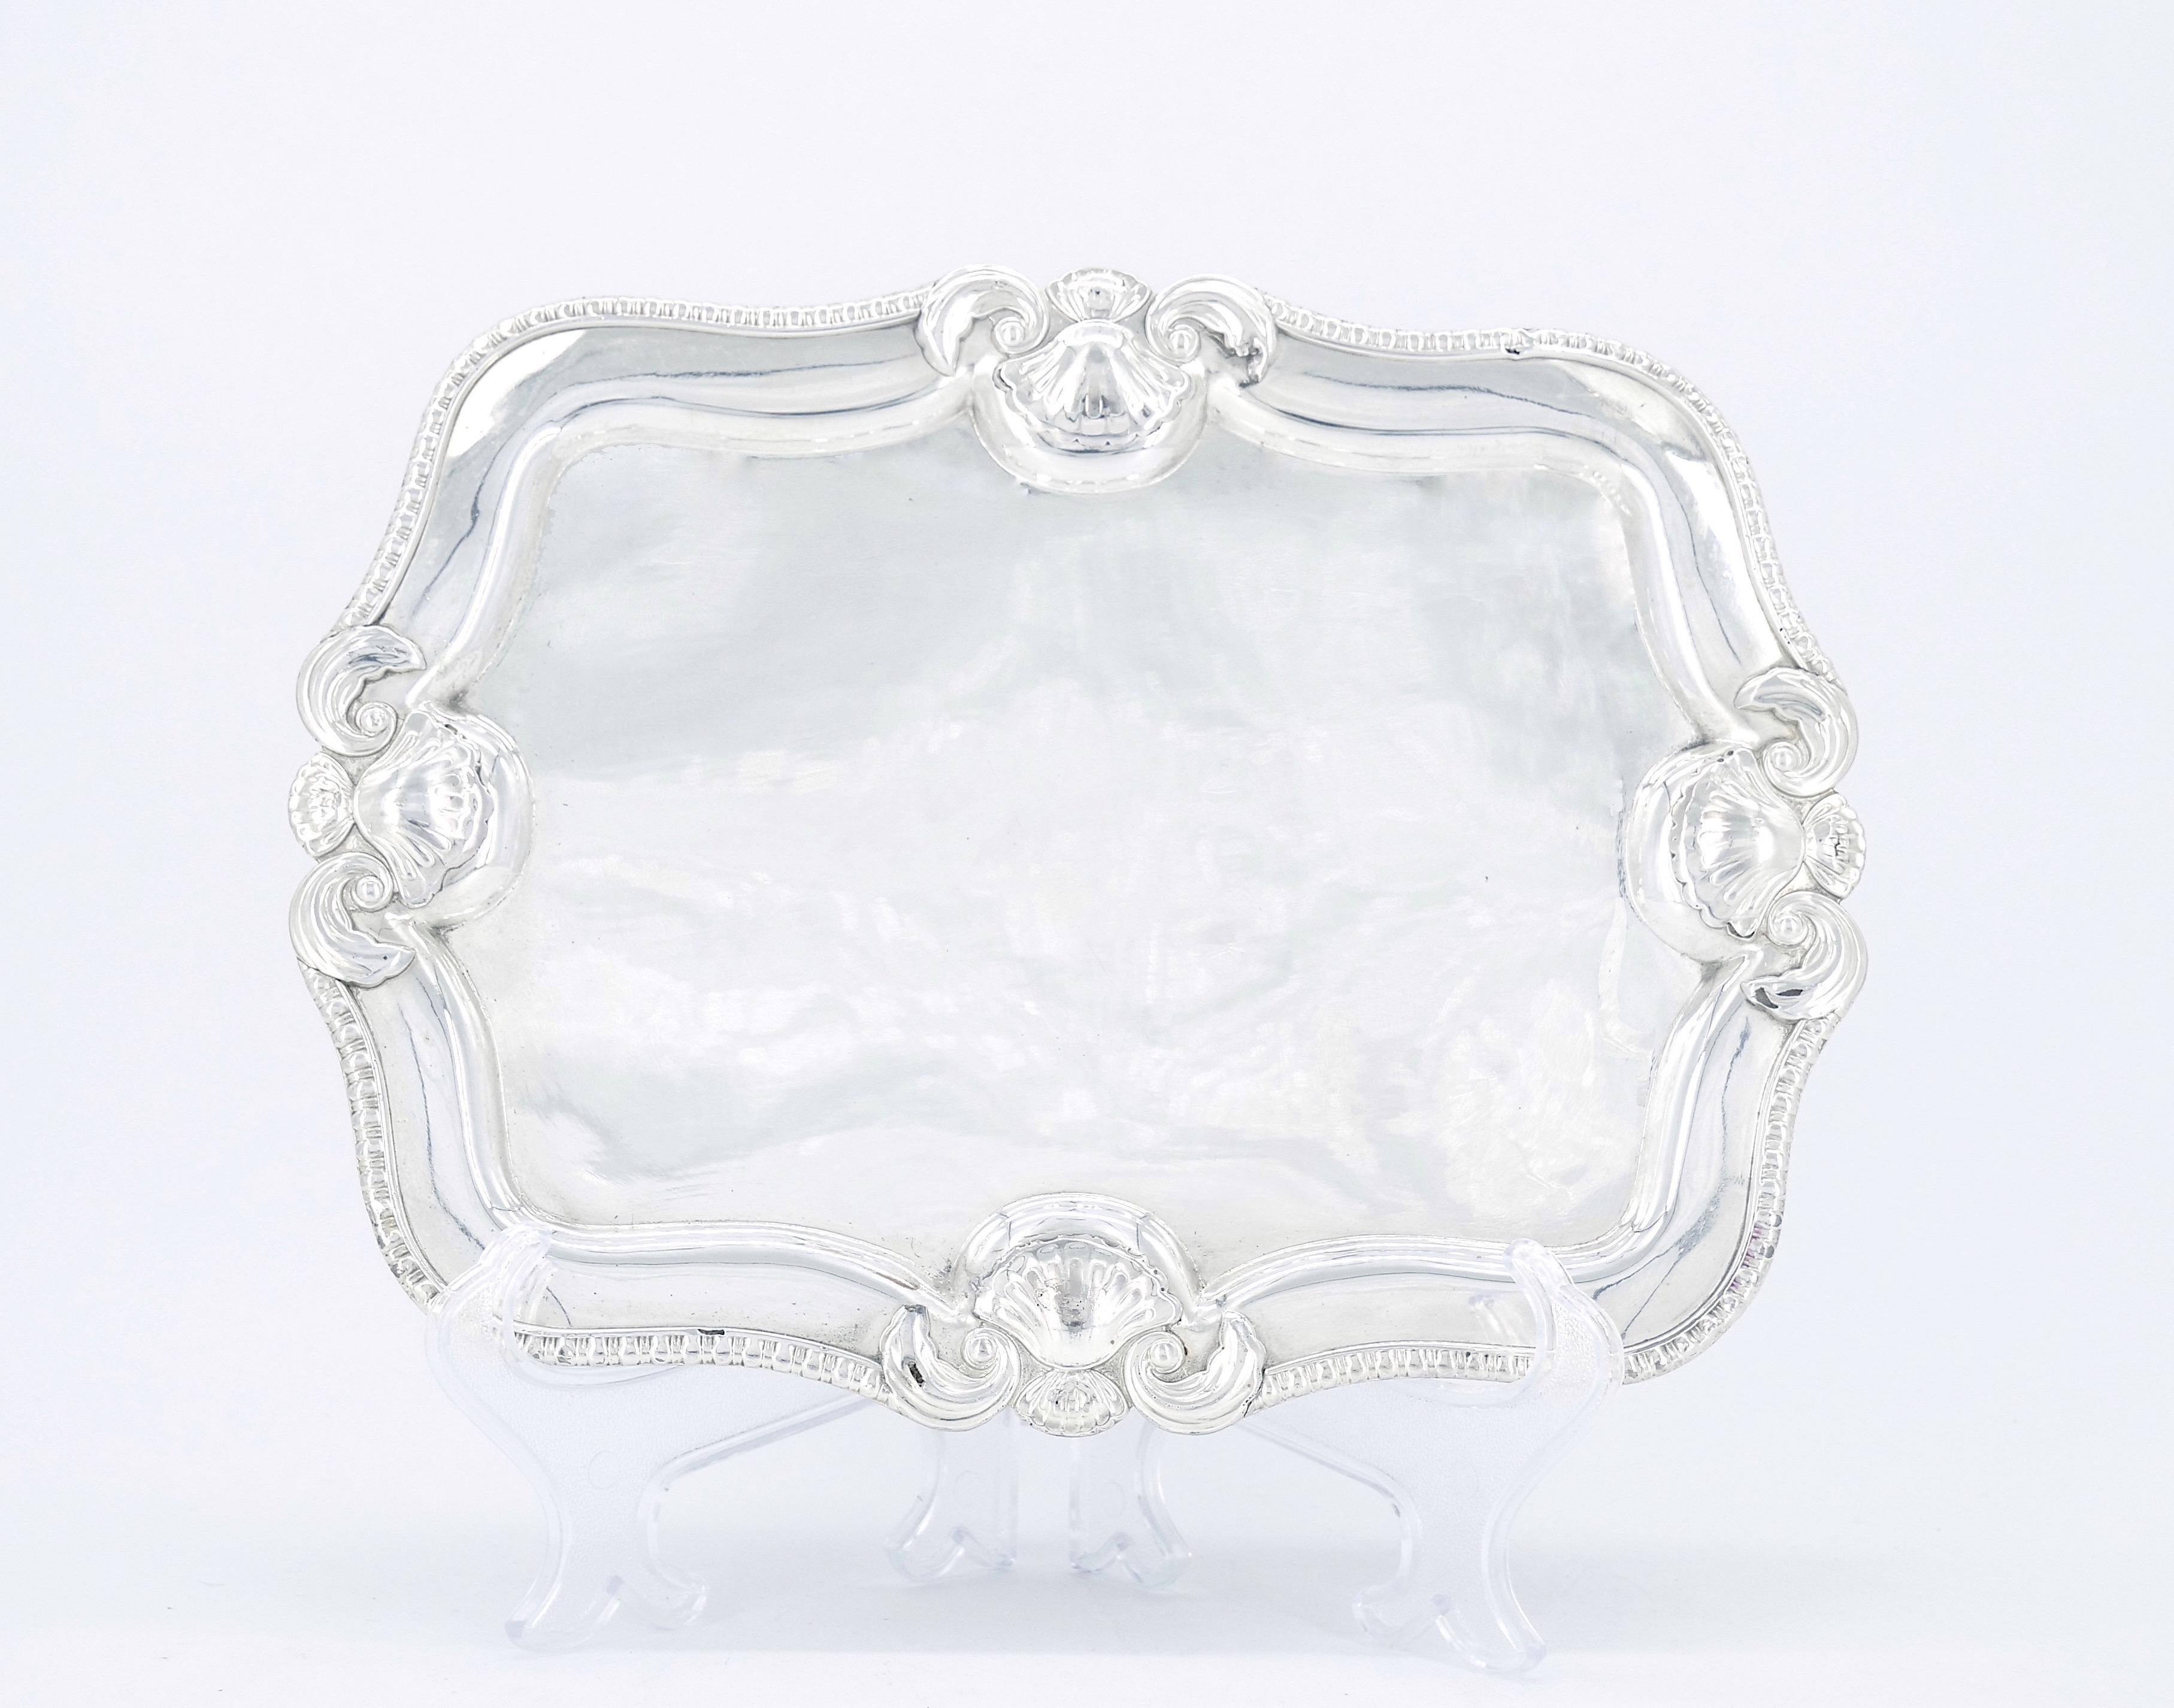 Discover the captivating beauty of our antique English silver-plated footed serving tray with a stunning border design. This remarkable piece seamlessly blends the allure of antiquity with the sophistication of intricate detailing and elevated feet.